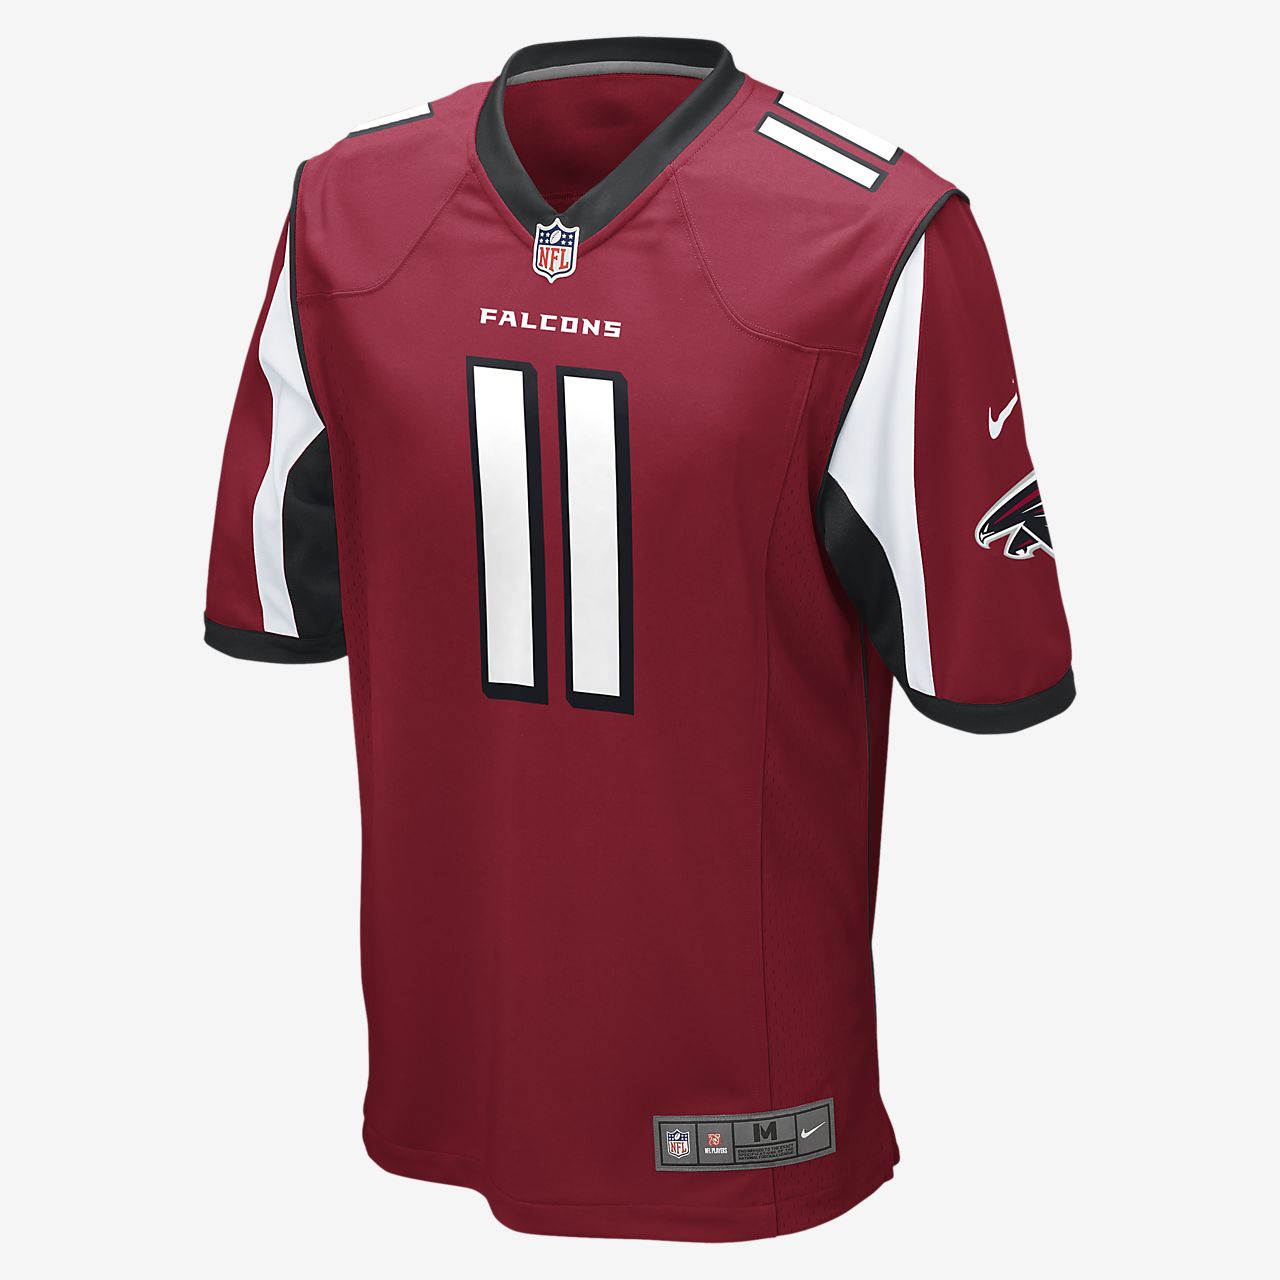 Nike Authentic Nfl Jersey Size Chart